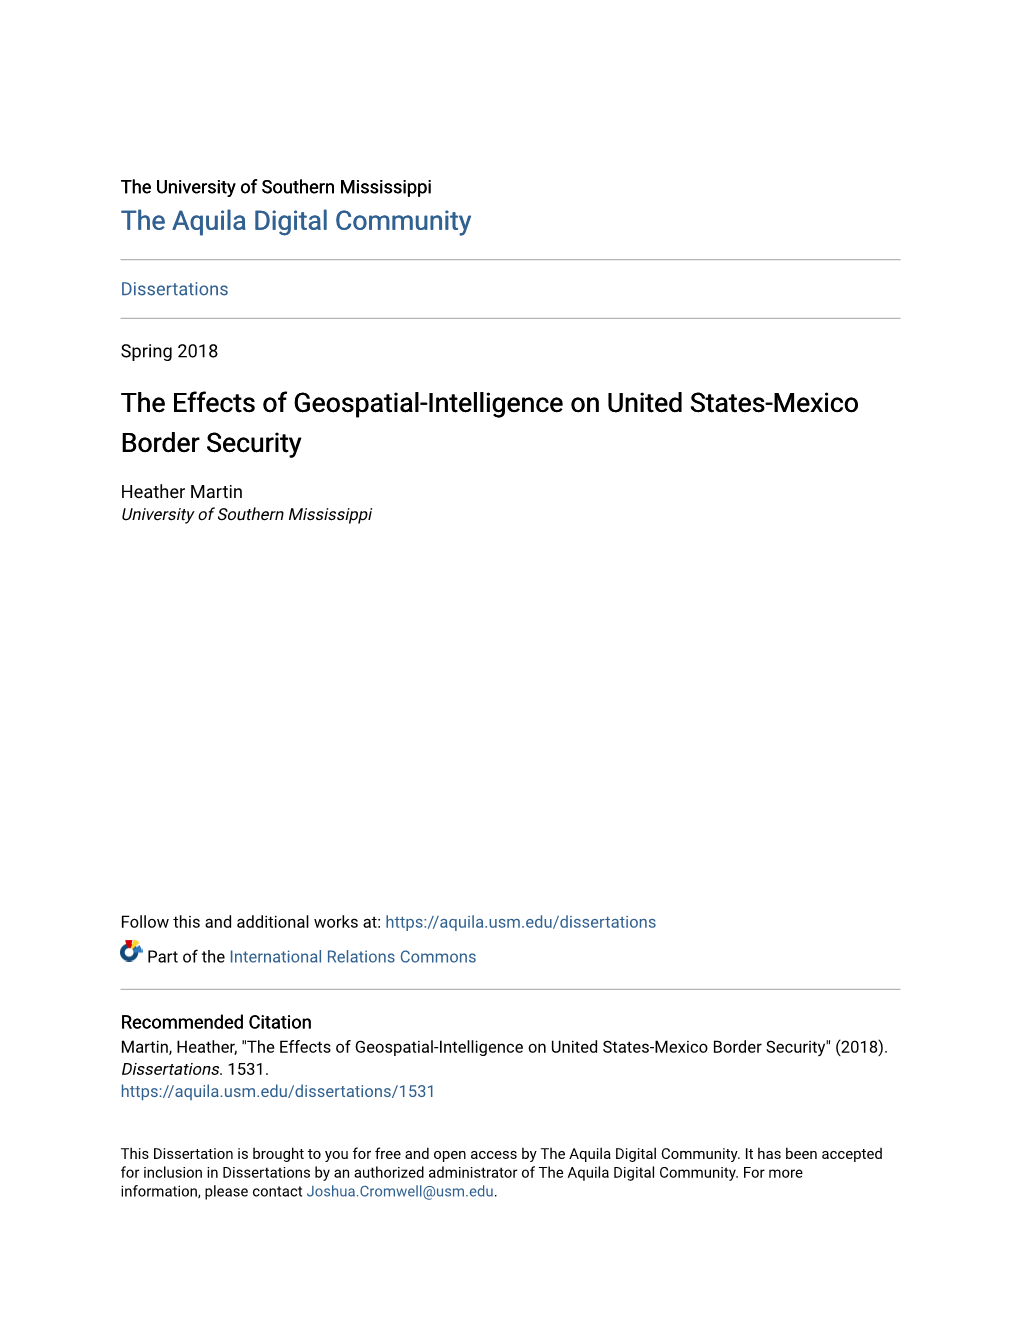 The Effects of Geospatial-Intelligence on United States-Mexico Border Security